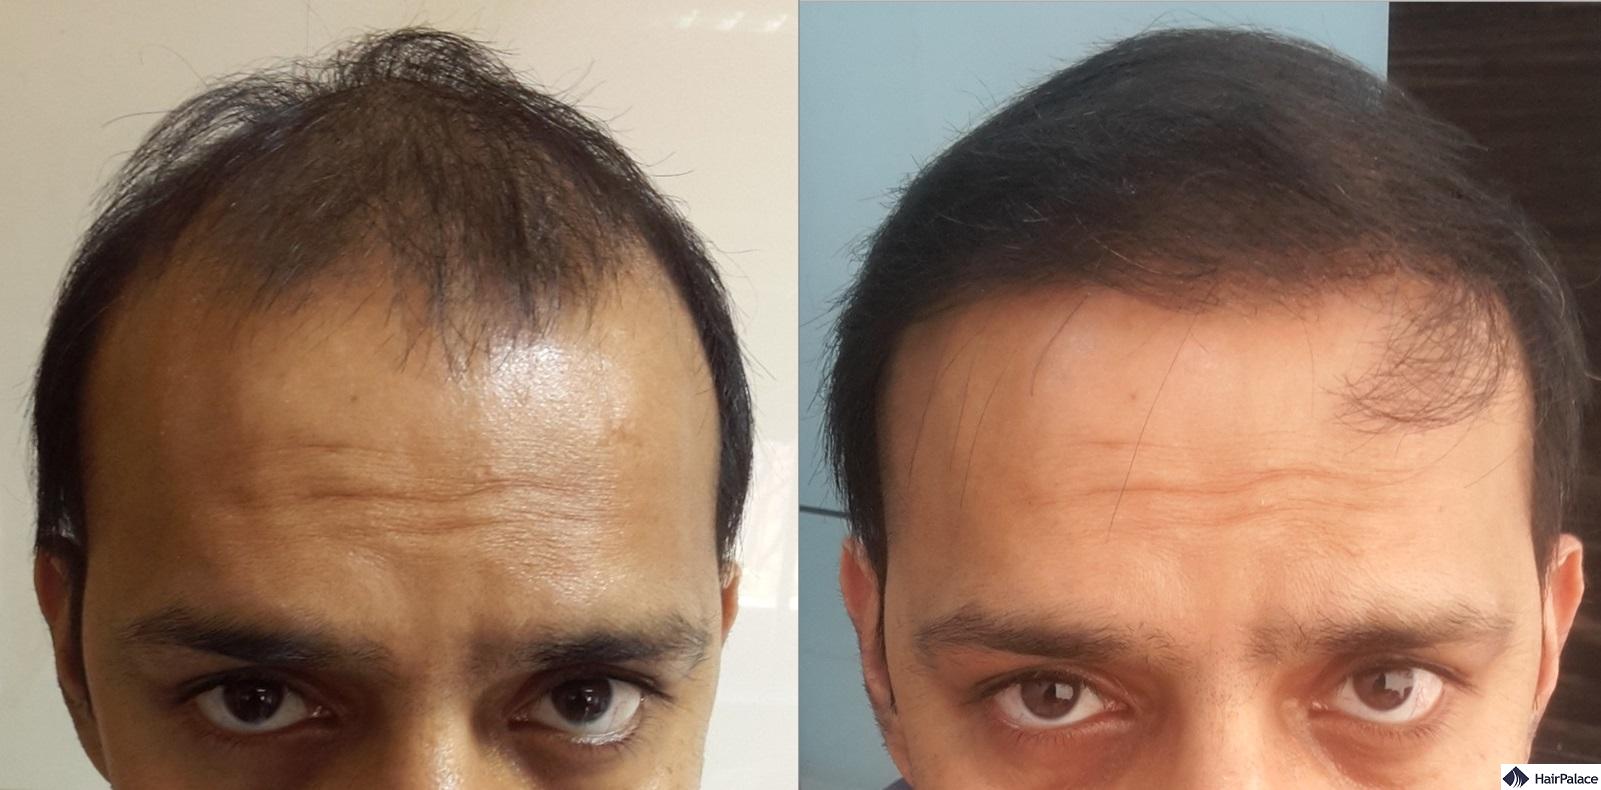 synthetic hair implant results for men